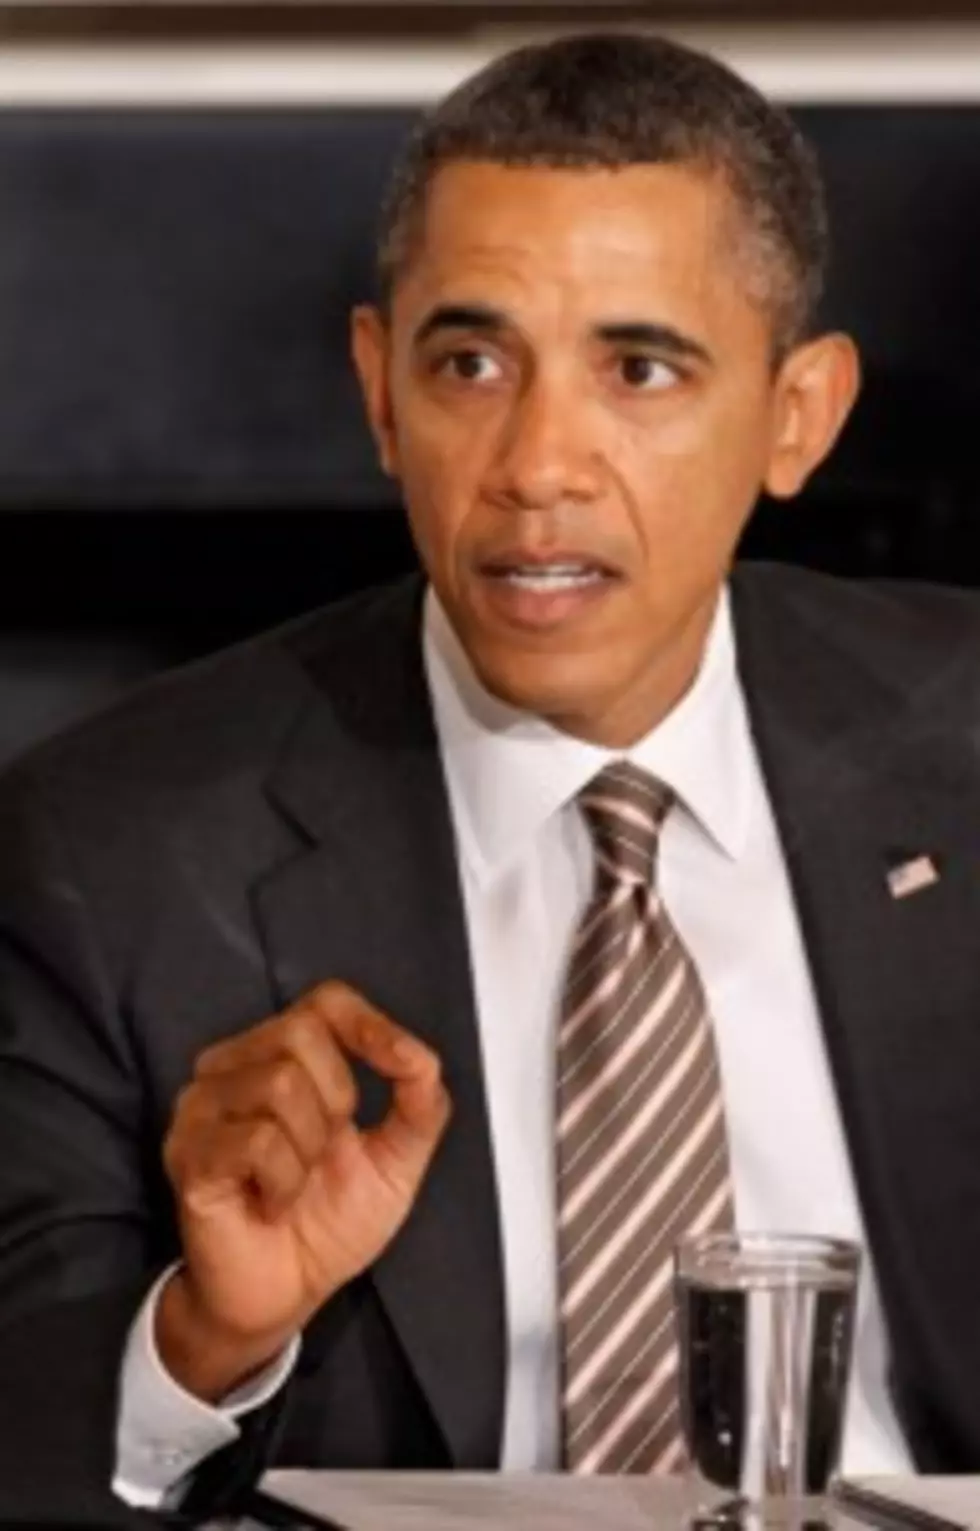 President Barack Obama Urges Action on Education in Presidential Weekly Address [VIDEO]